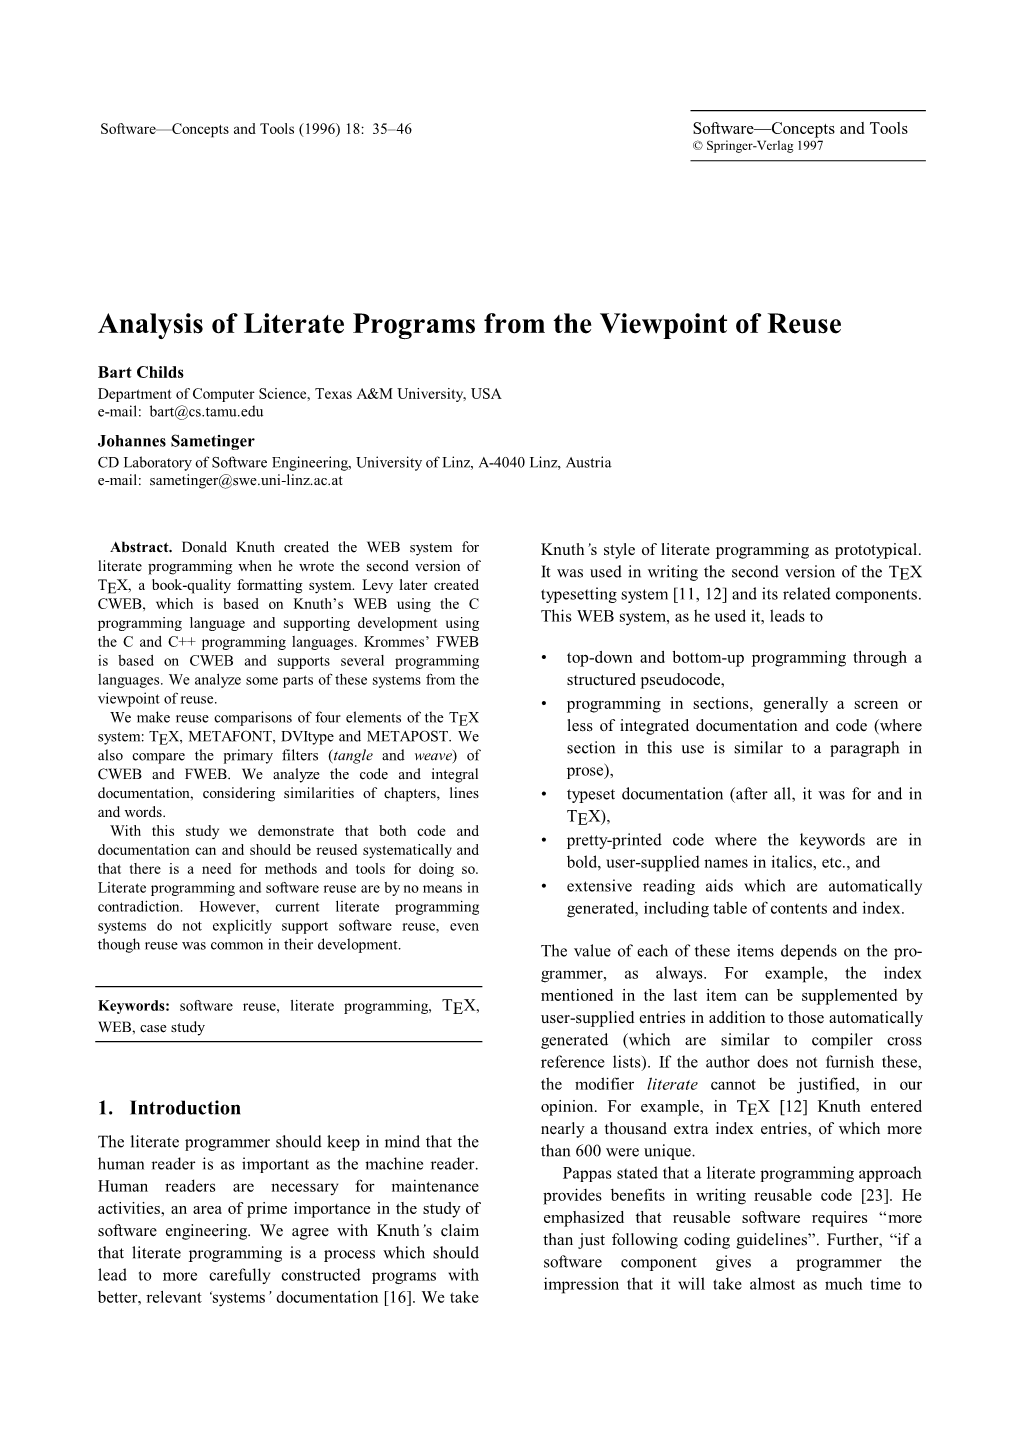 Analysis of Literate Programs from the Viewpoint of Reuse